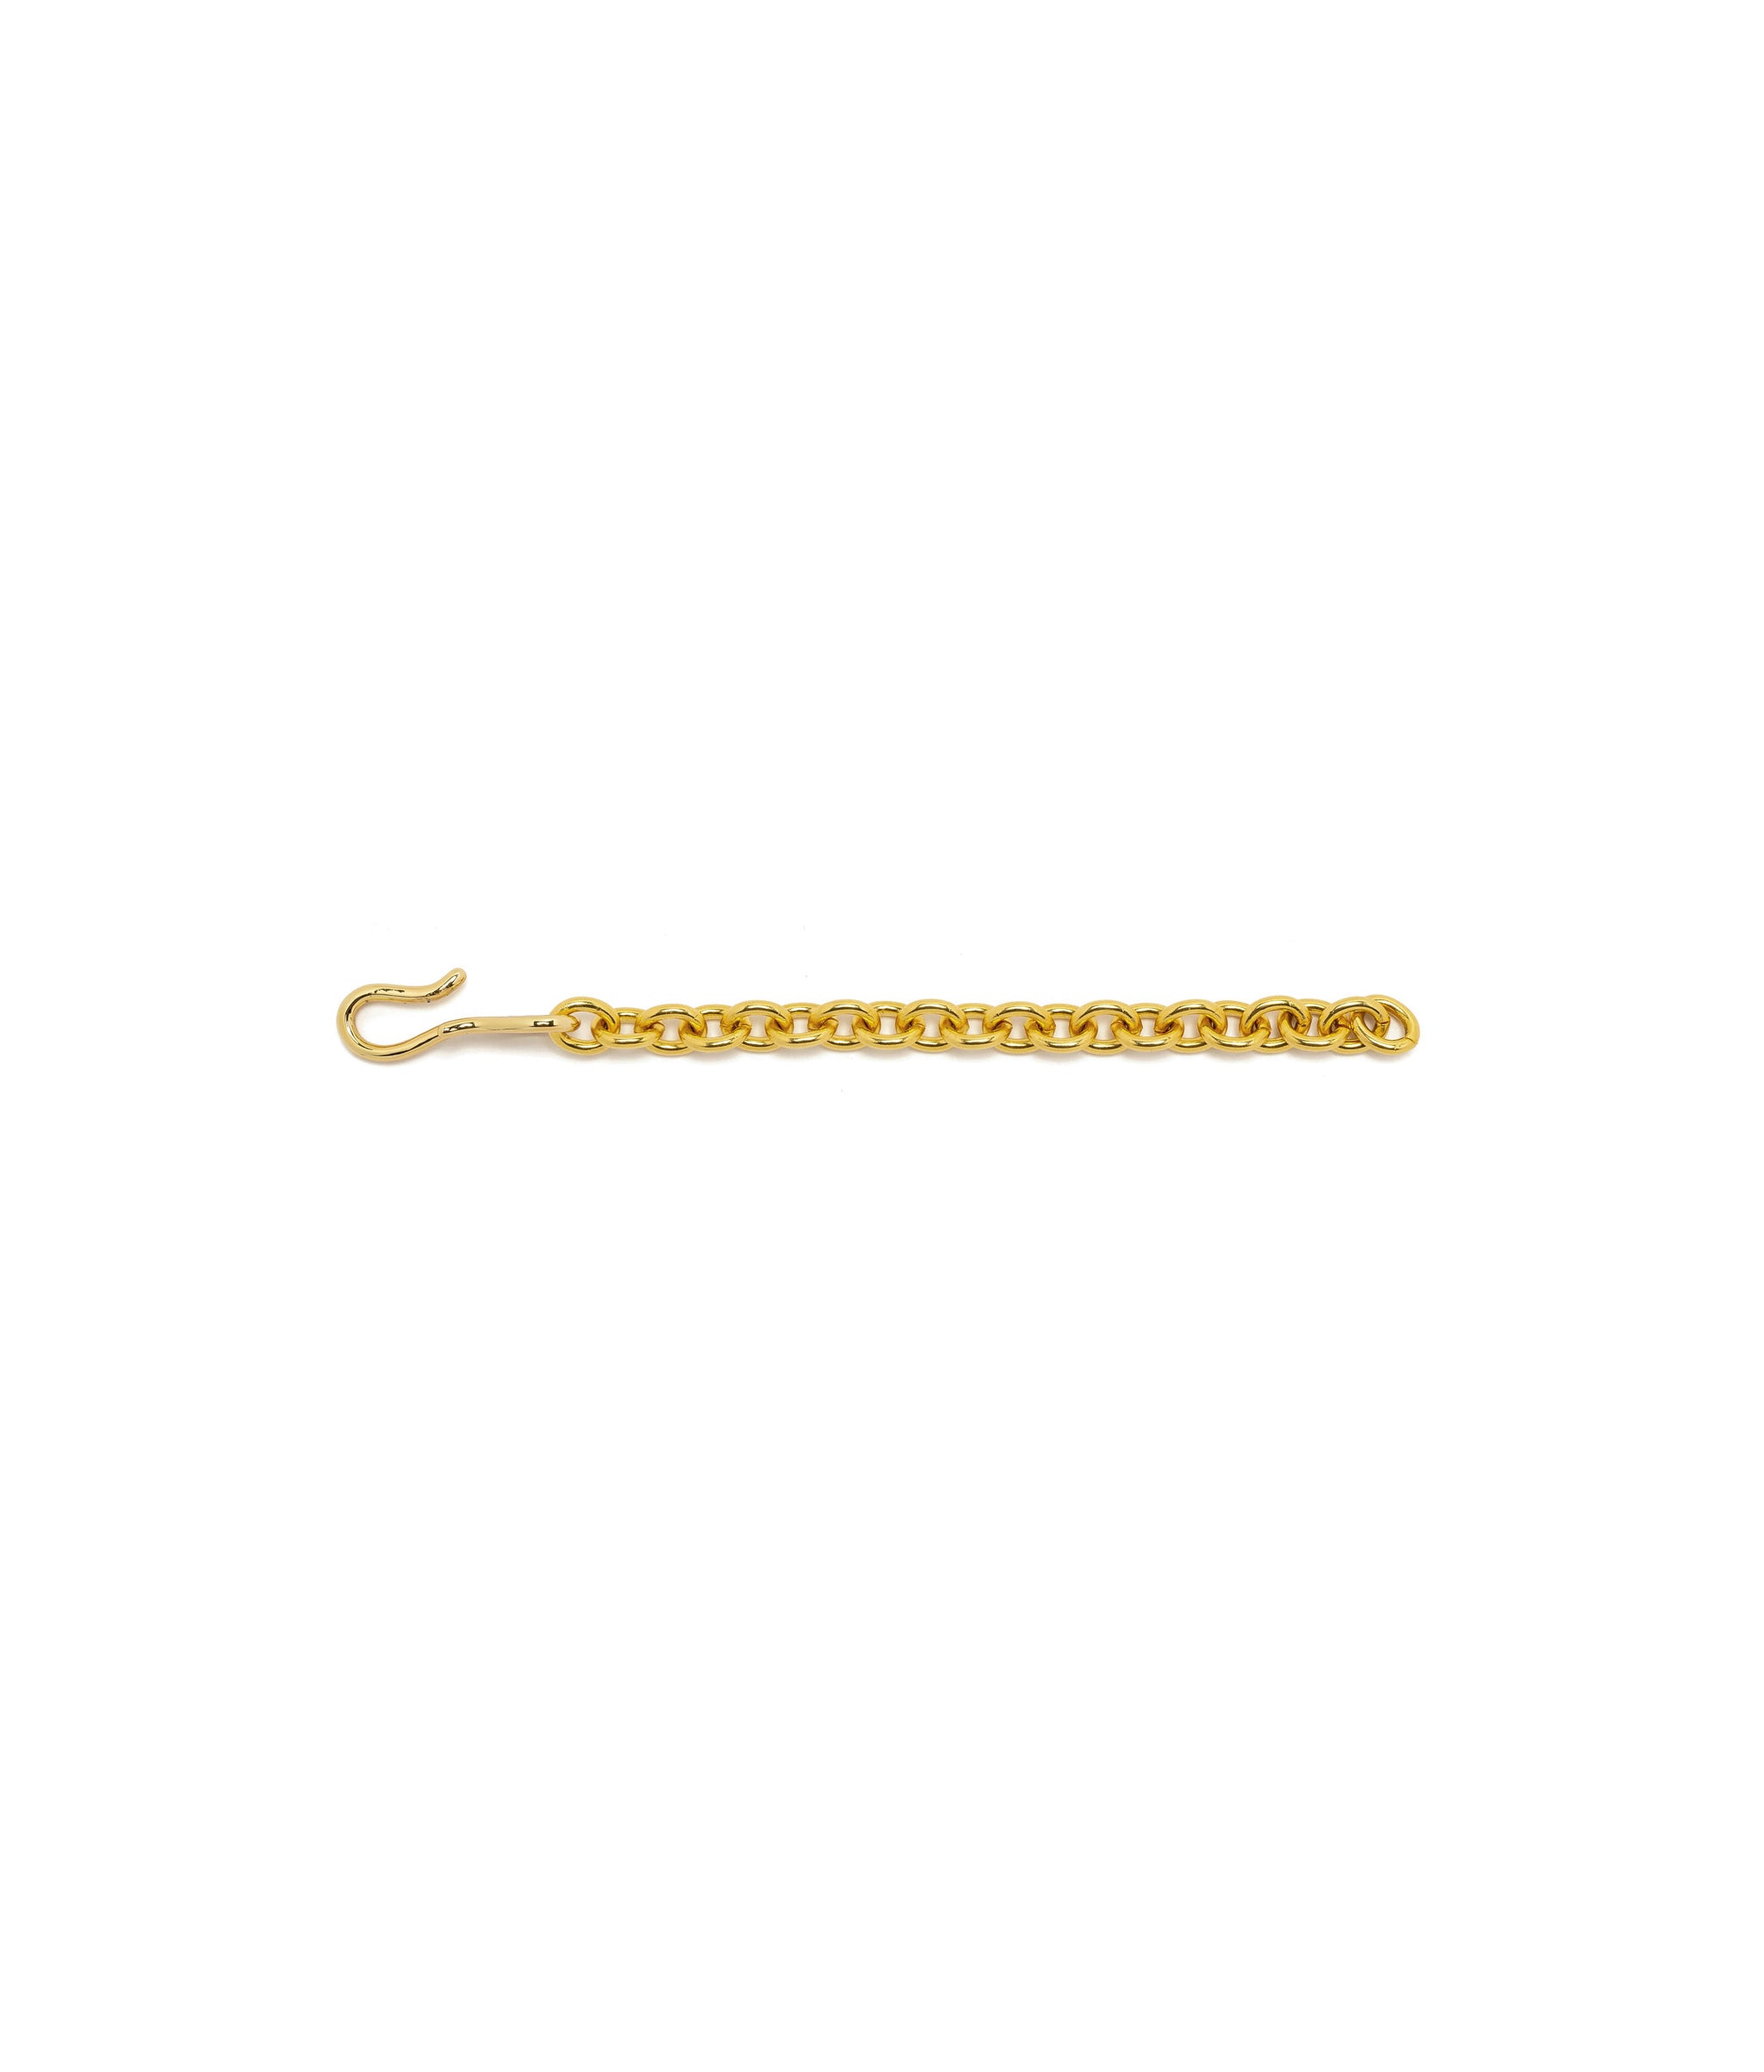 4.25" Cable Gold Extender. Gold-plated brass cable chain with S-hook, to make your Lizzie Fortunato necklaces longer.